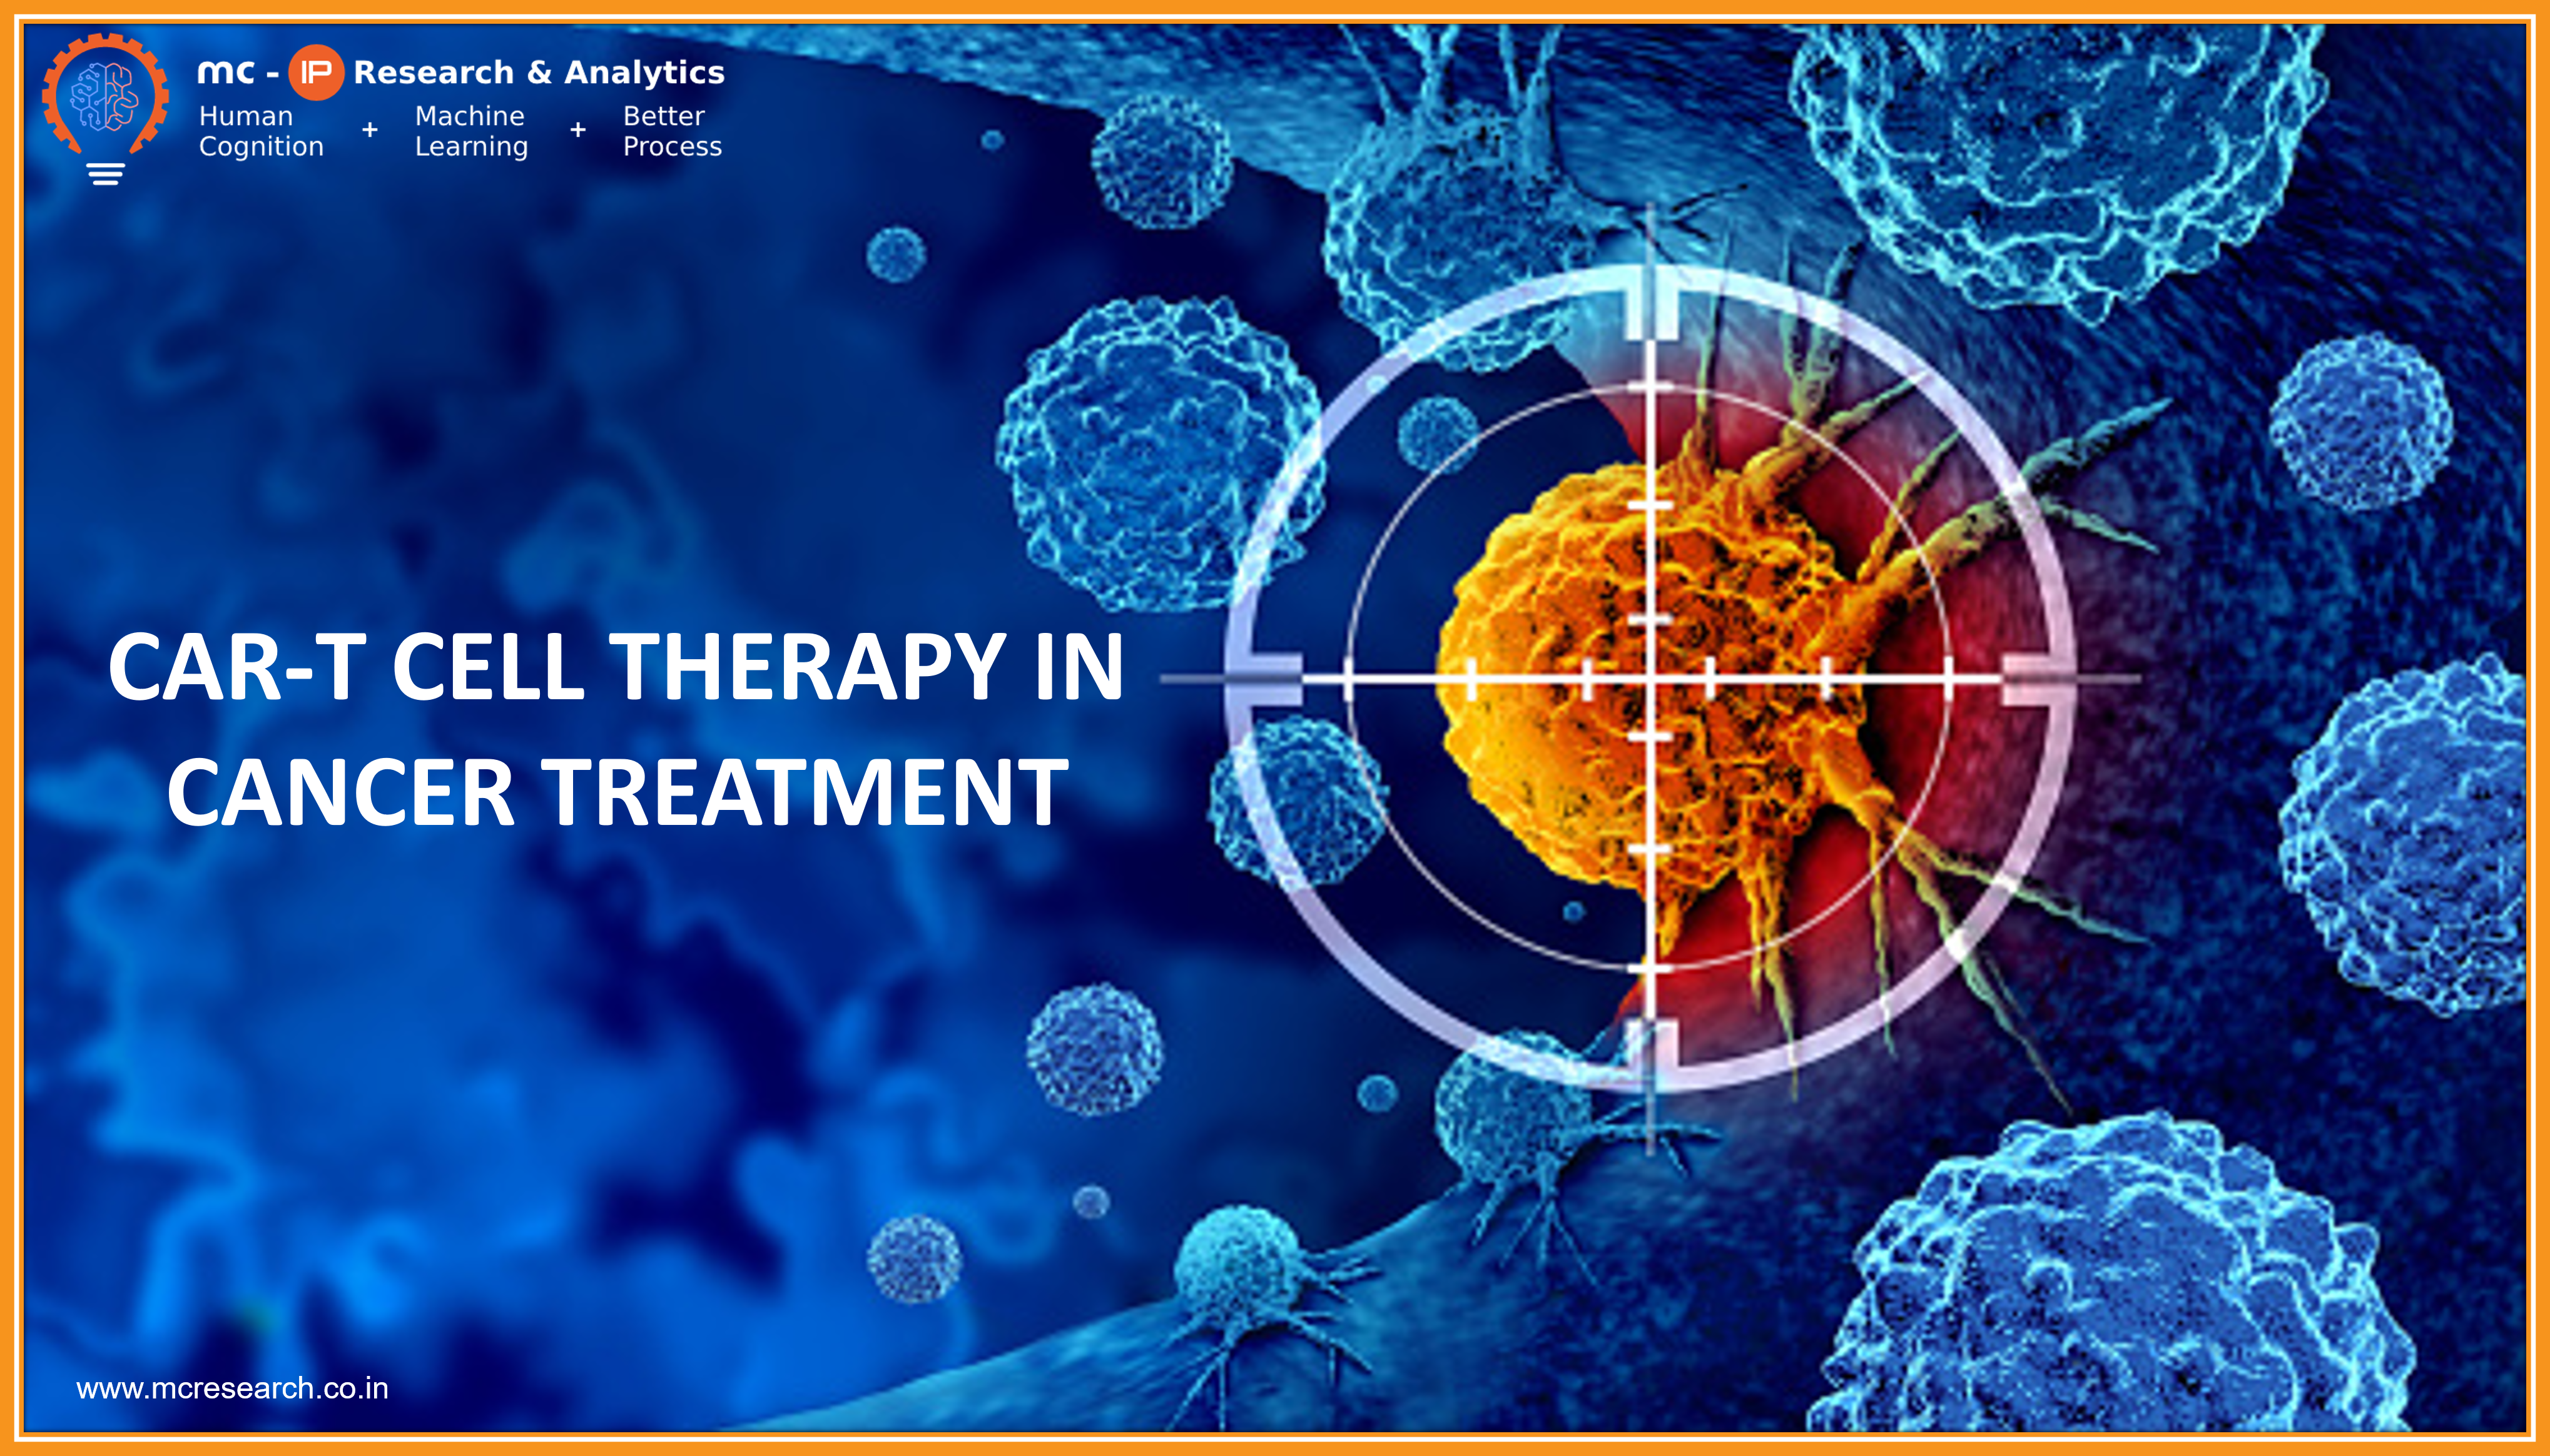 CAR-T CELL THERAPY FOR CANCER TREATMENT – A DEEPER LOOK